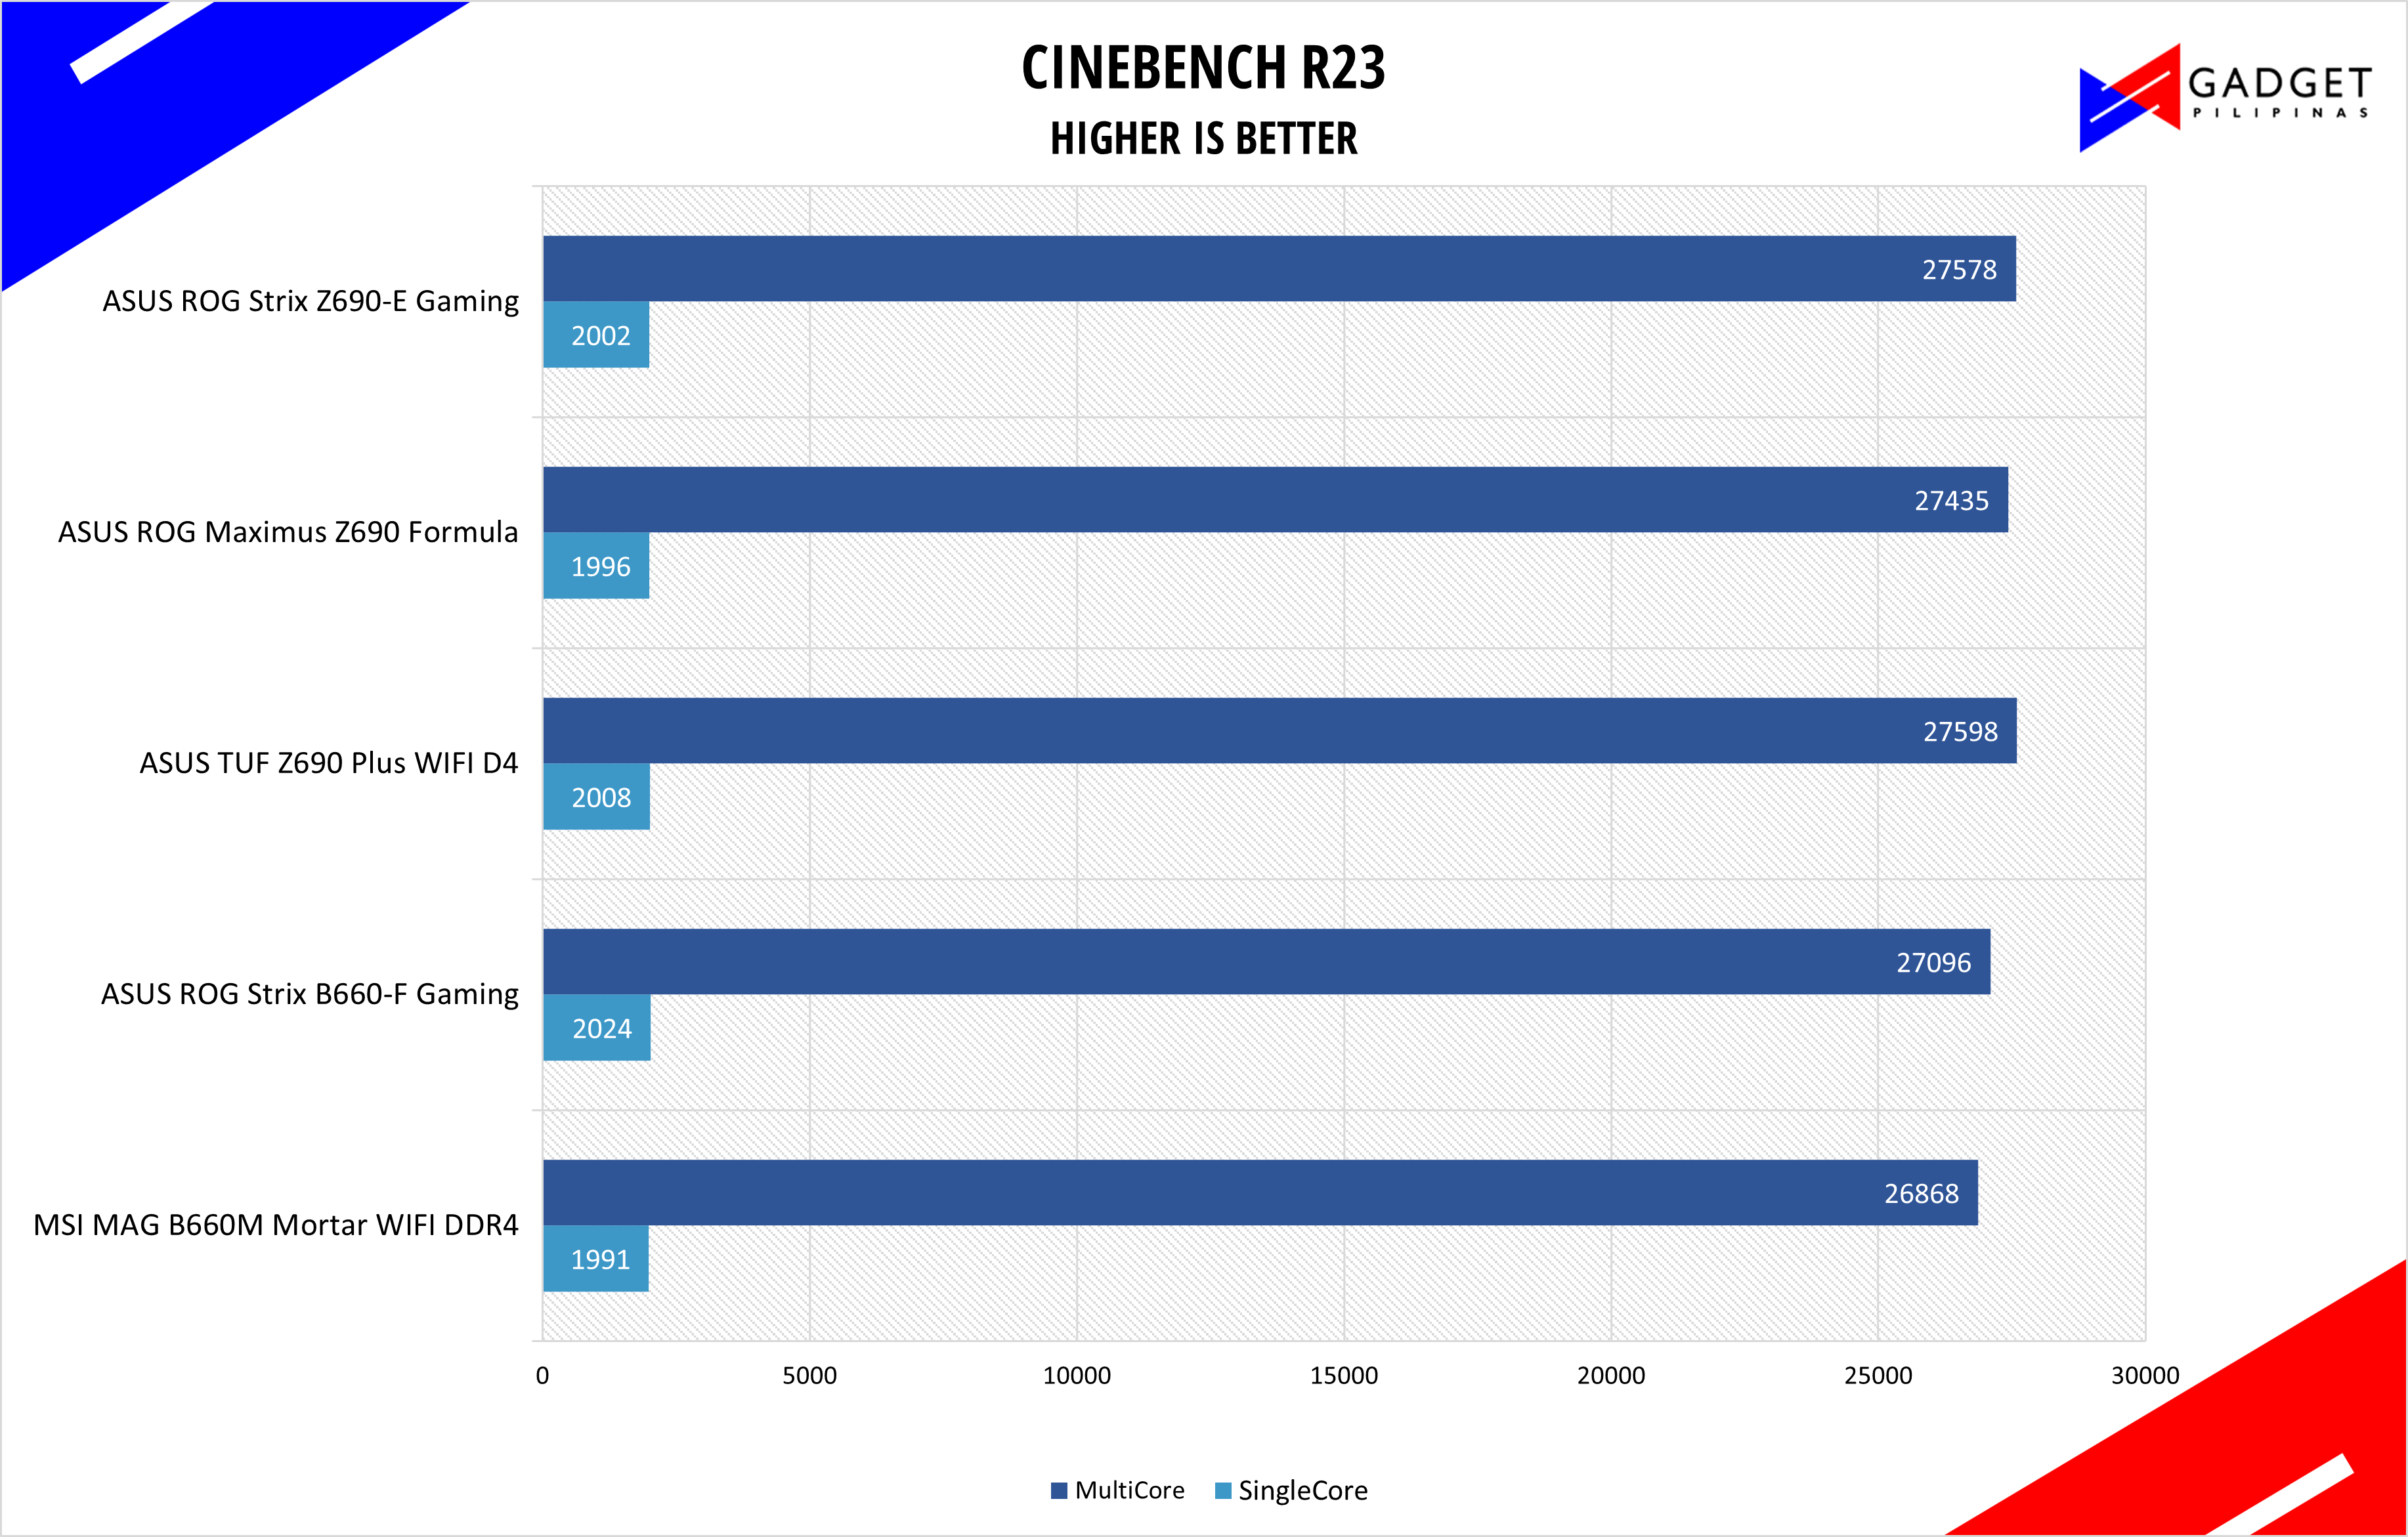 ASUS ROG Strix B660-F Gaming Motherboard Review - Cinebench R23 Benchmark